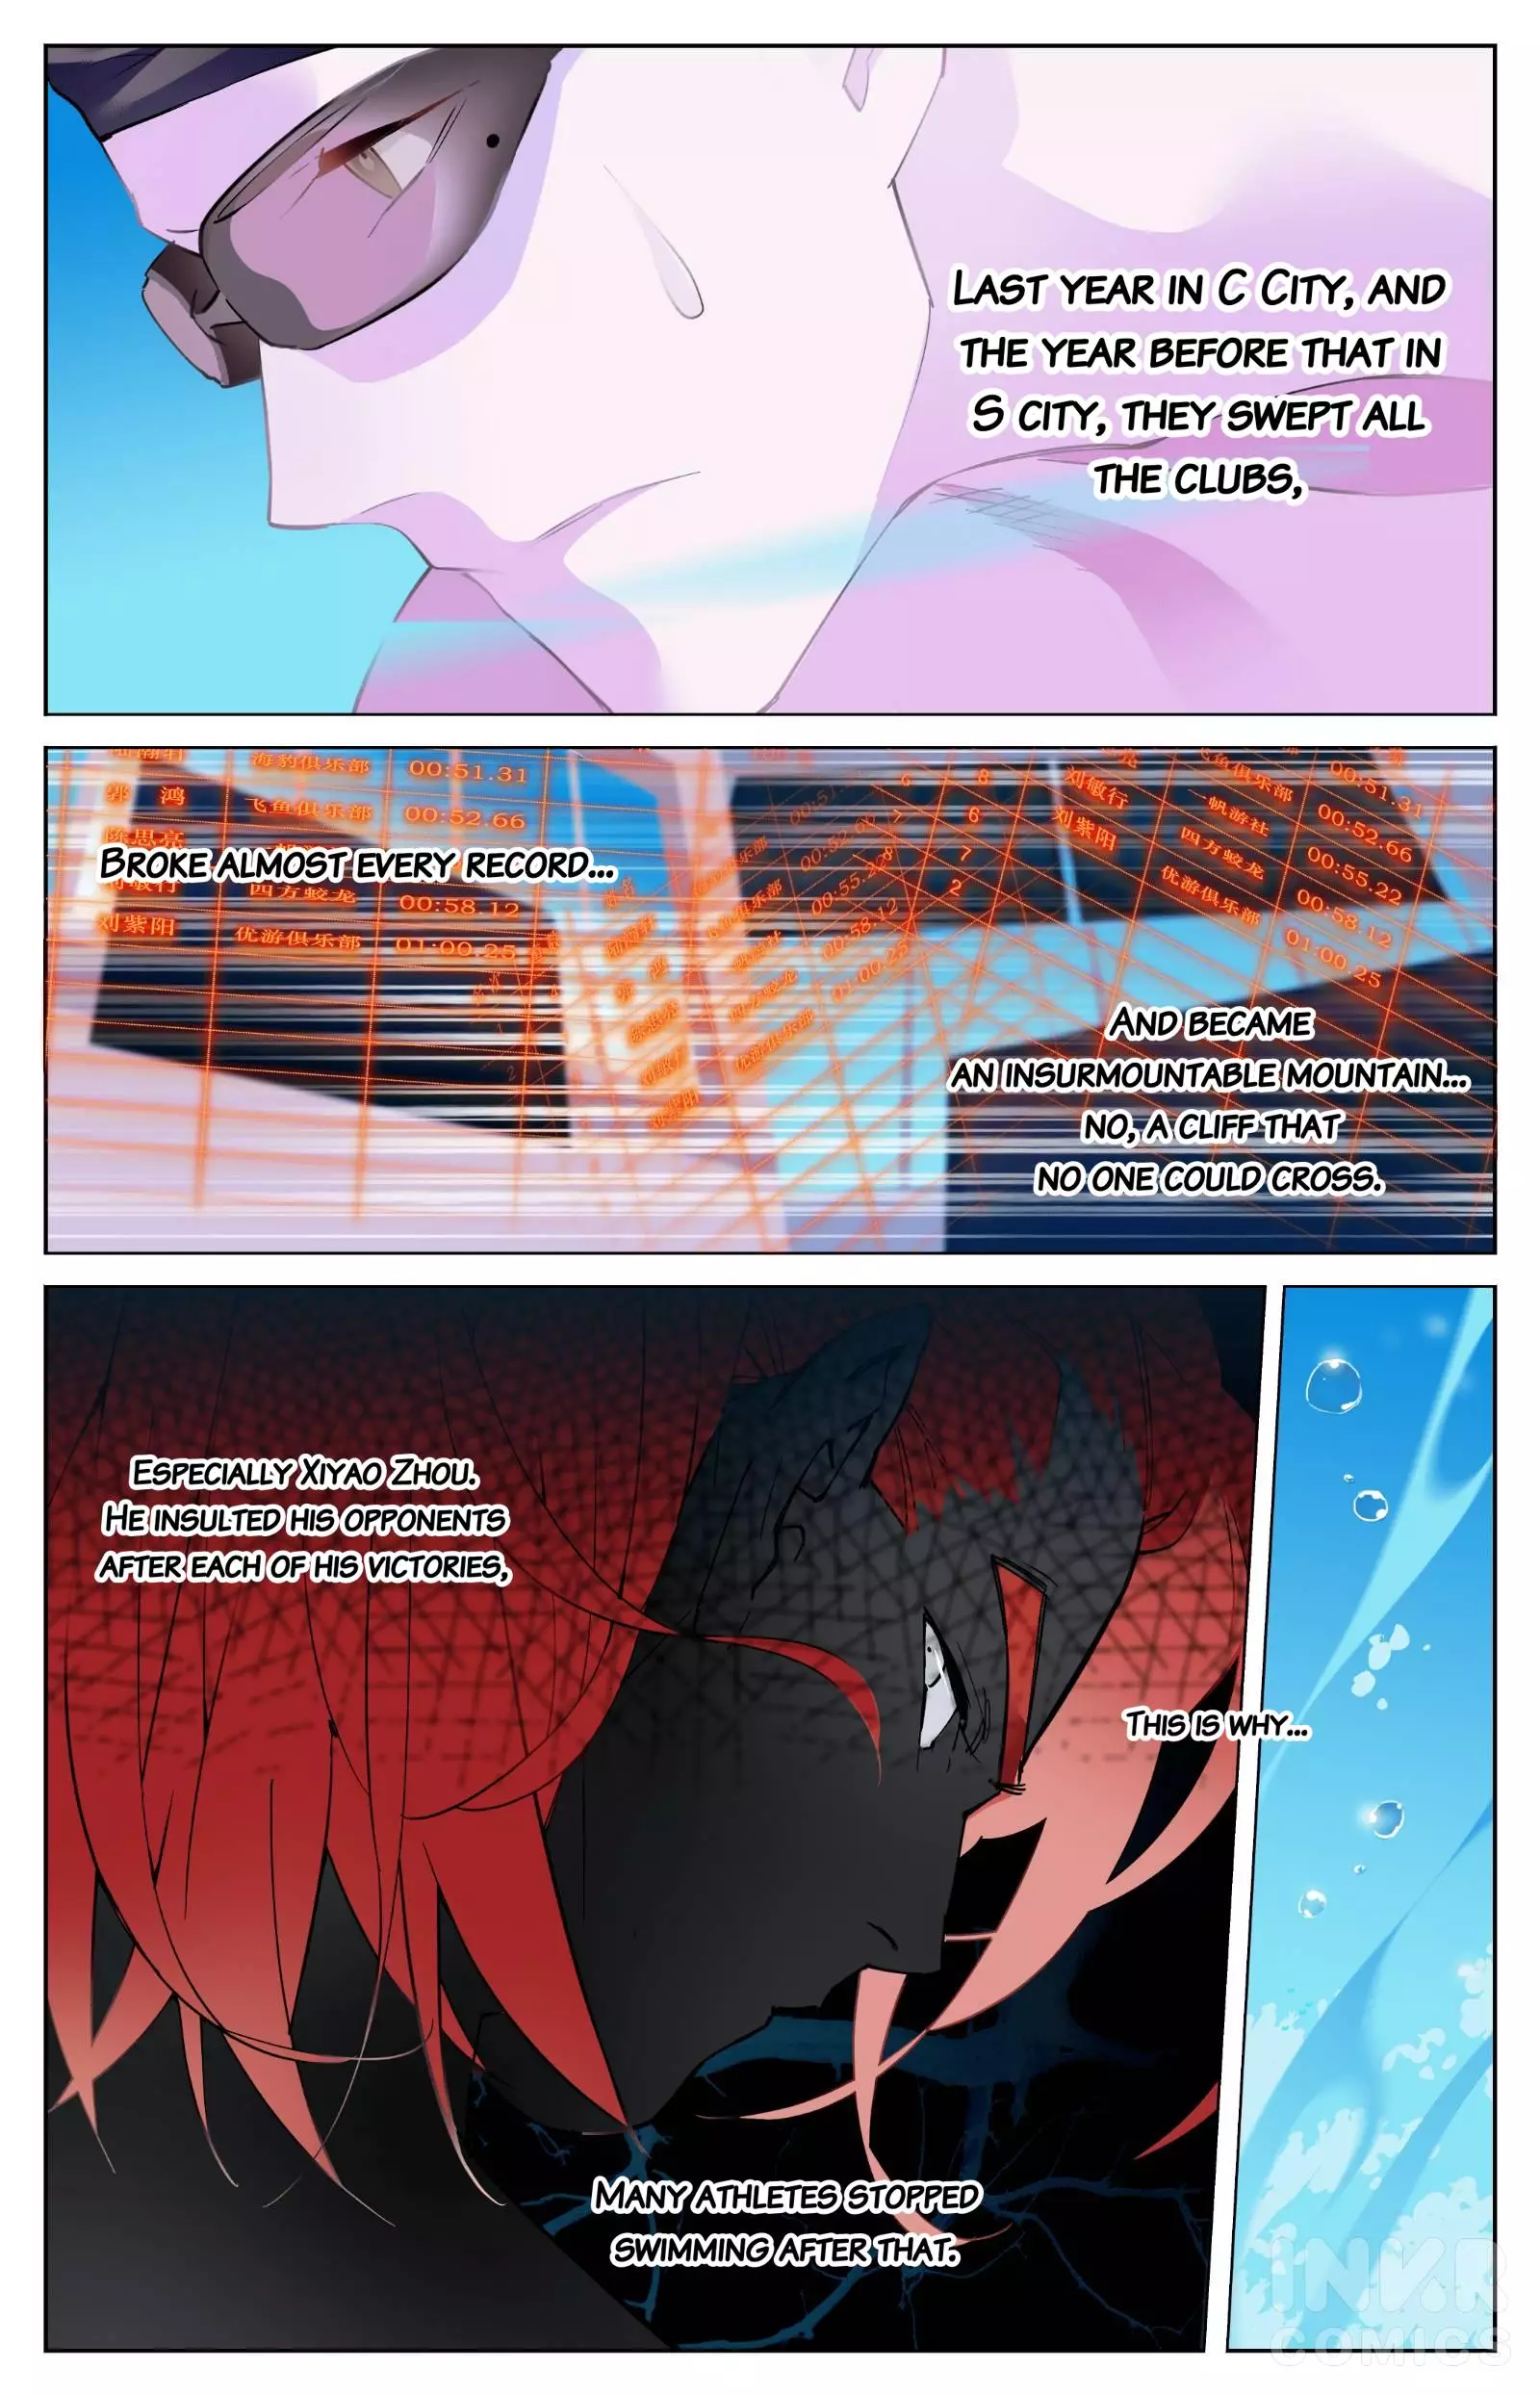 Azure 50 Meters - 18 page 4-dd2dfb0b